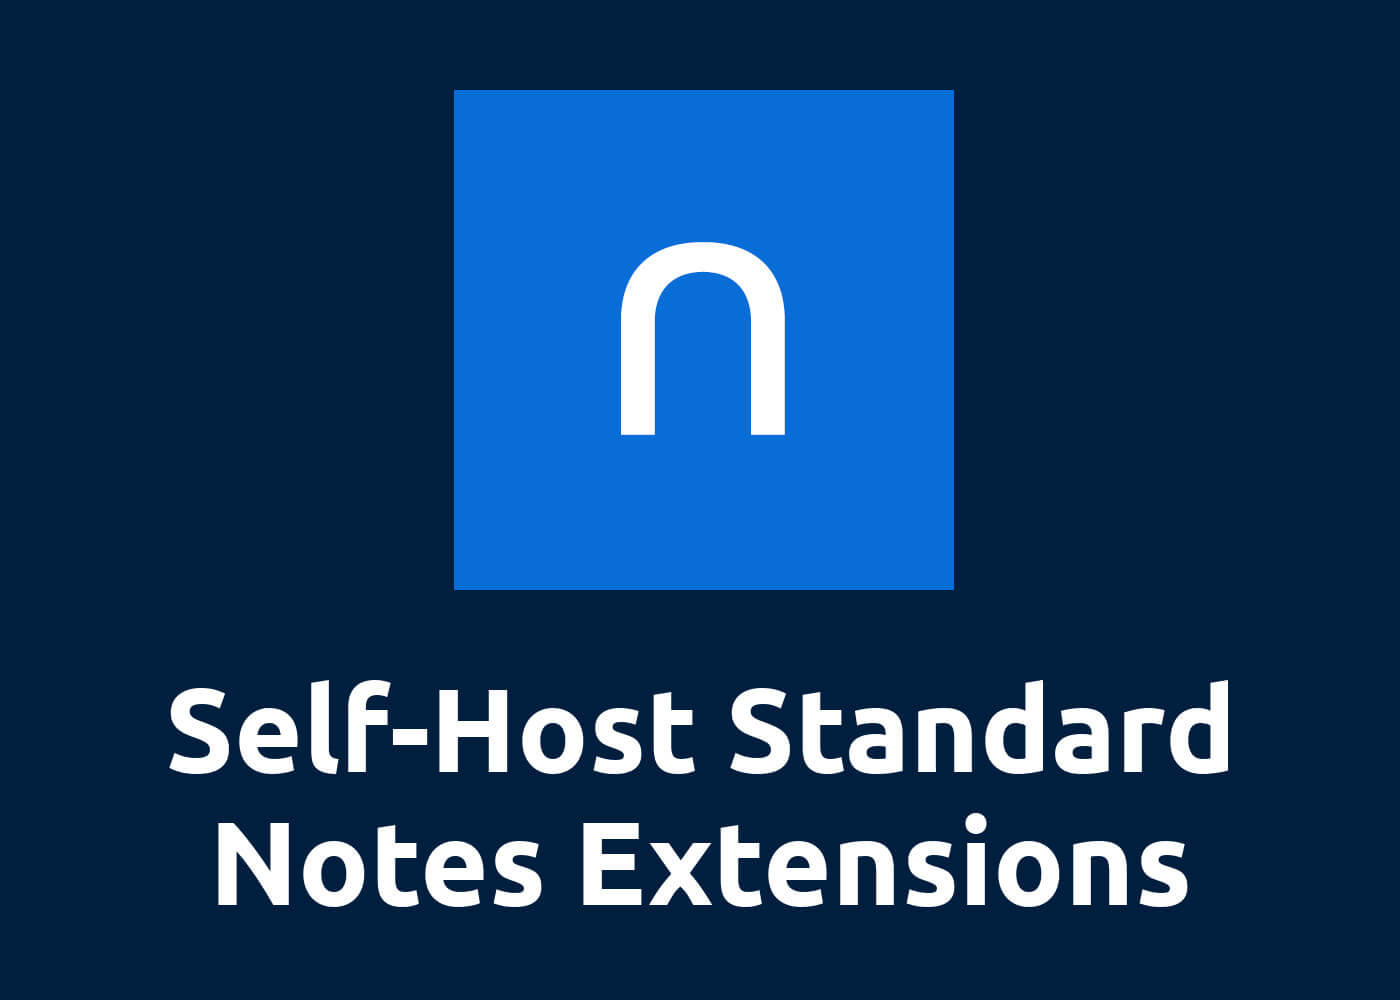 Self-Host and Dockerize Standard Notes Extensions with Docker-Compose